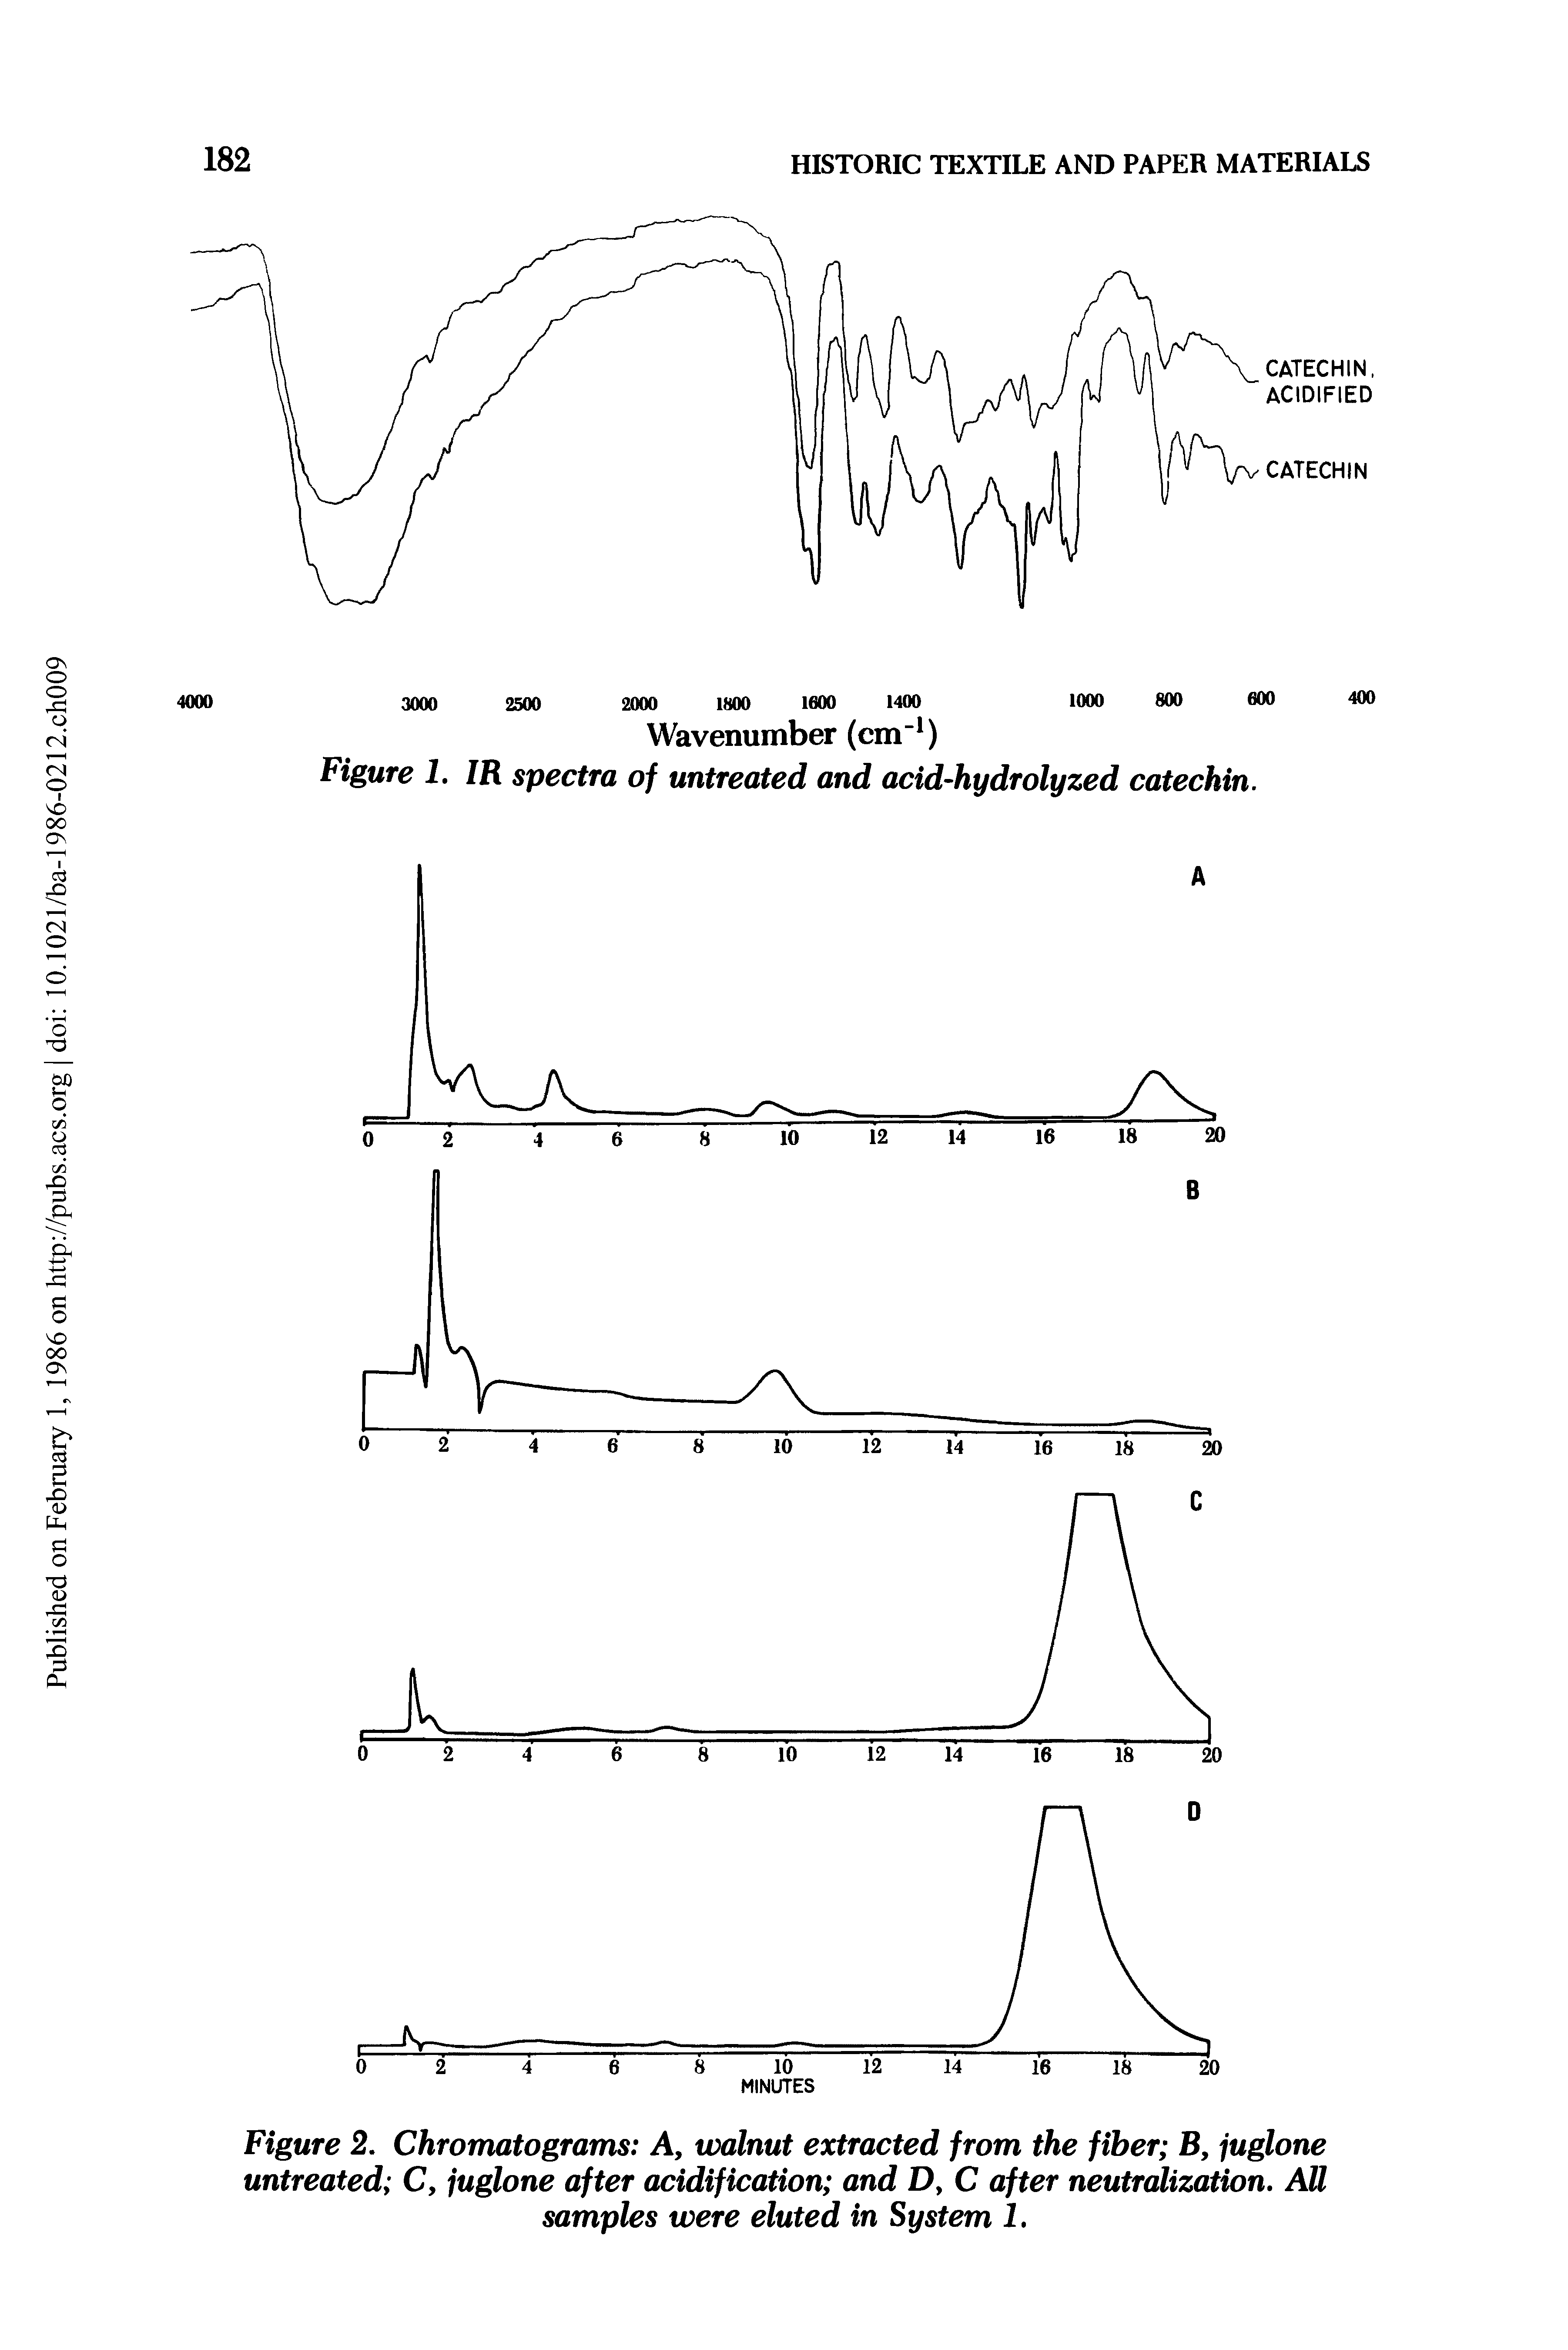 Figure 2. Chromatograms A, walnut extracted from the fiber B, juglone untreated C, juglone after acidification and D, C after neutralization. AU samples were eluted in System 1.